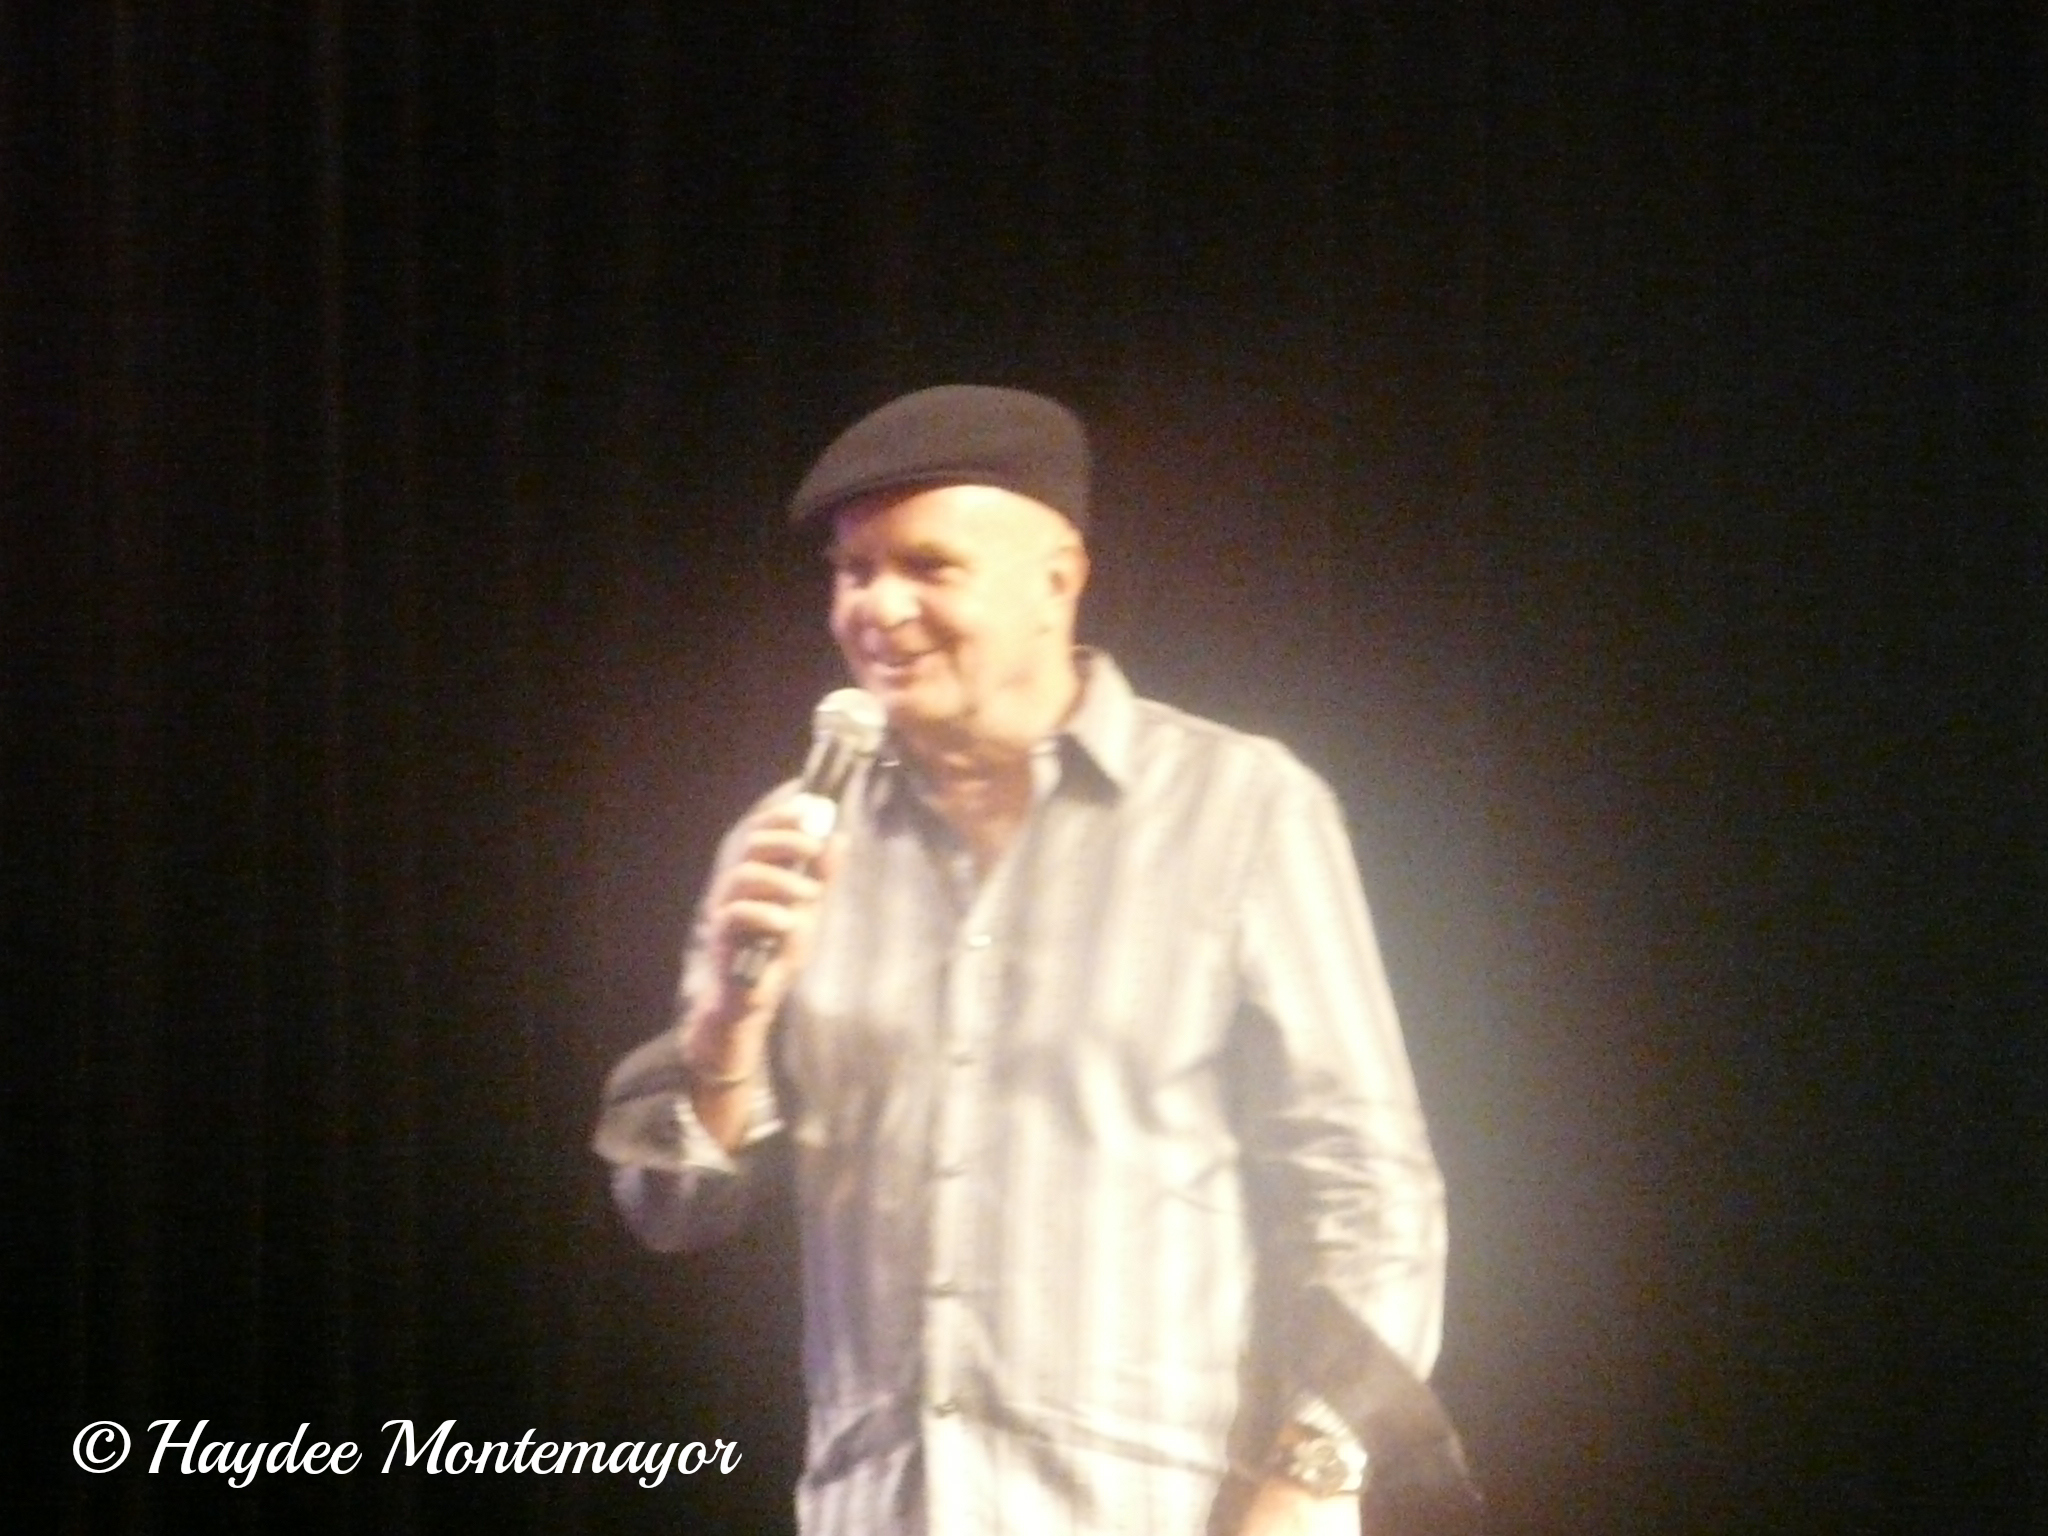 Dr. Wayne Dyer photo taken by Haydee Montemayor author of The Love and Treasure Blog  found at www.loveandtreasure.com